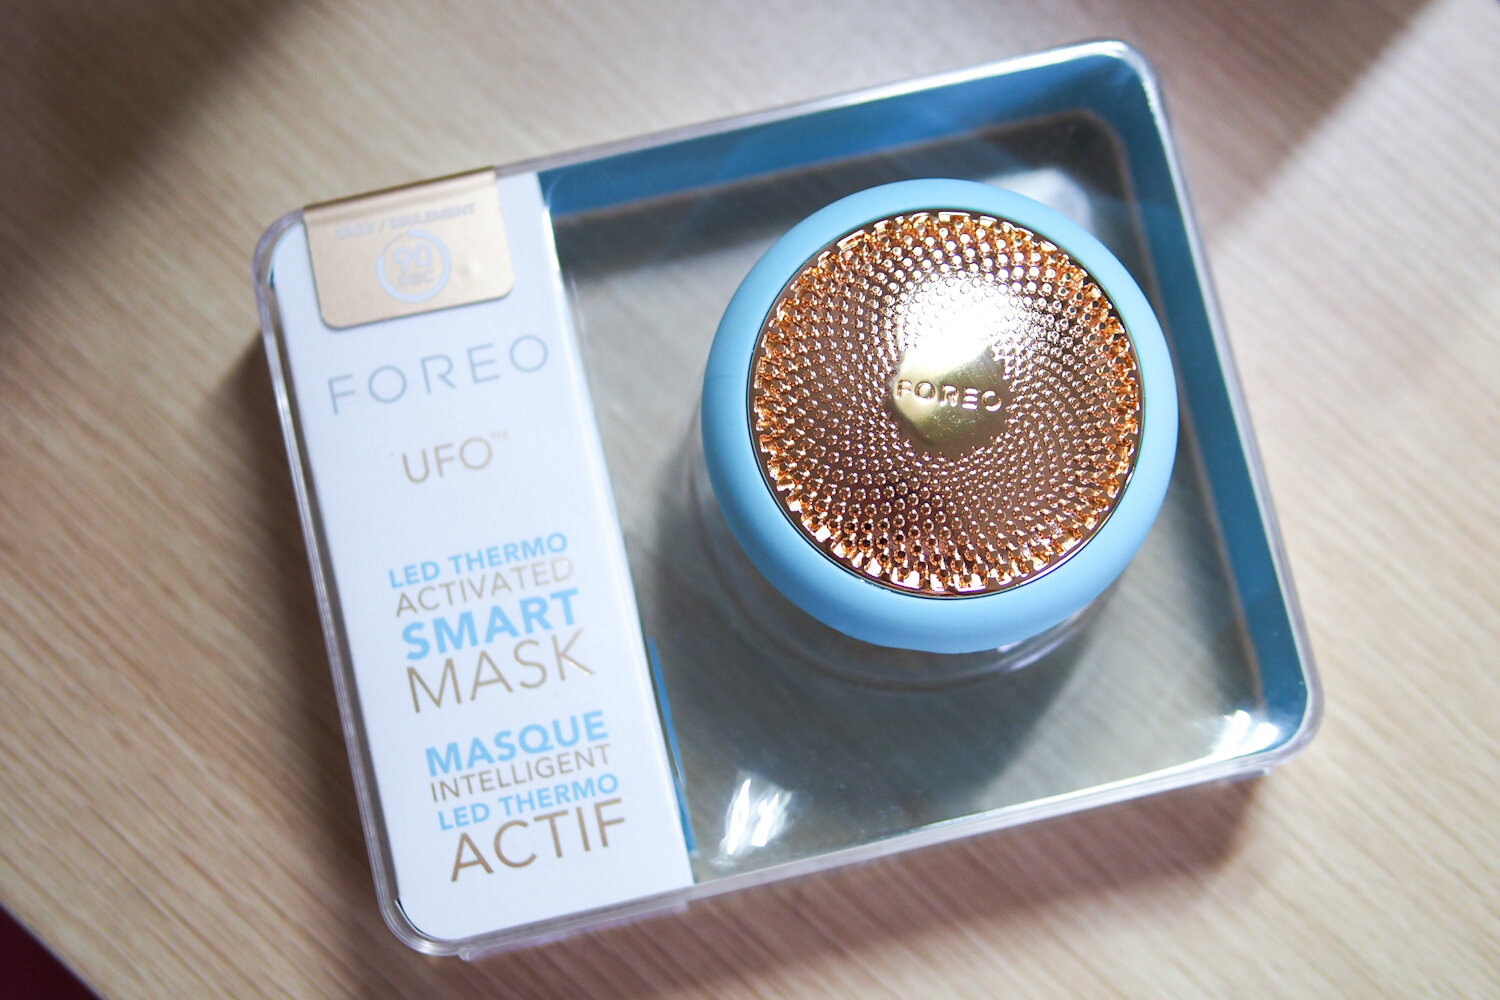 the-foreo-ufo-smart-mask-is-perfect-for-busy-lifestyles